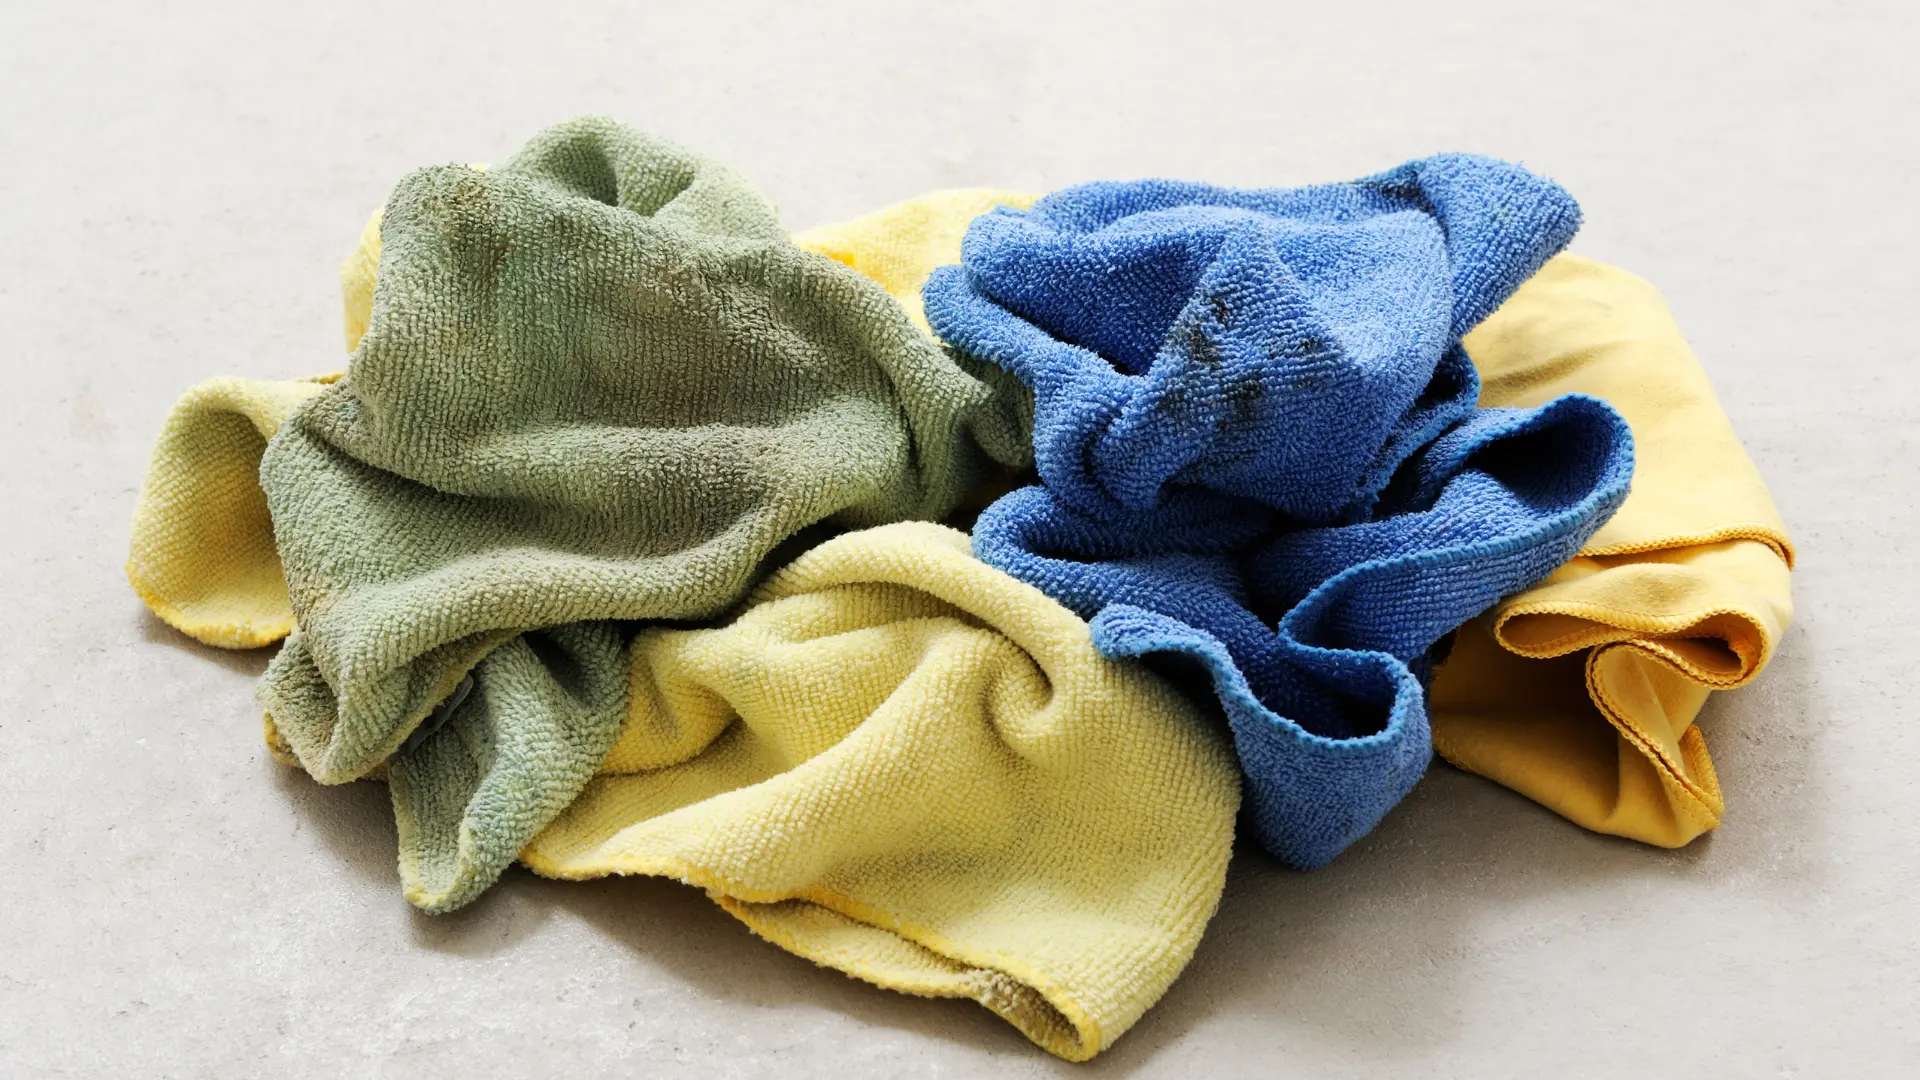 cotton rags